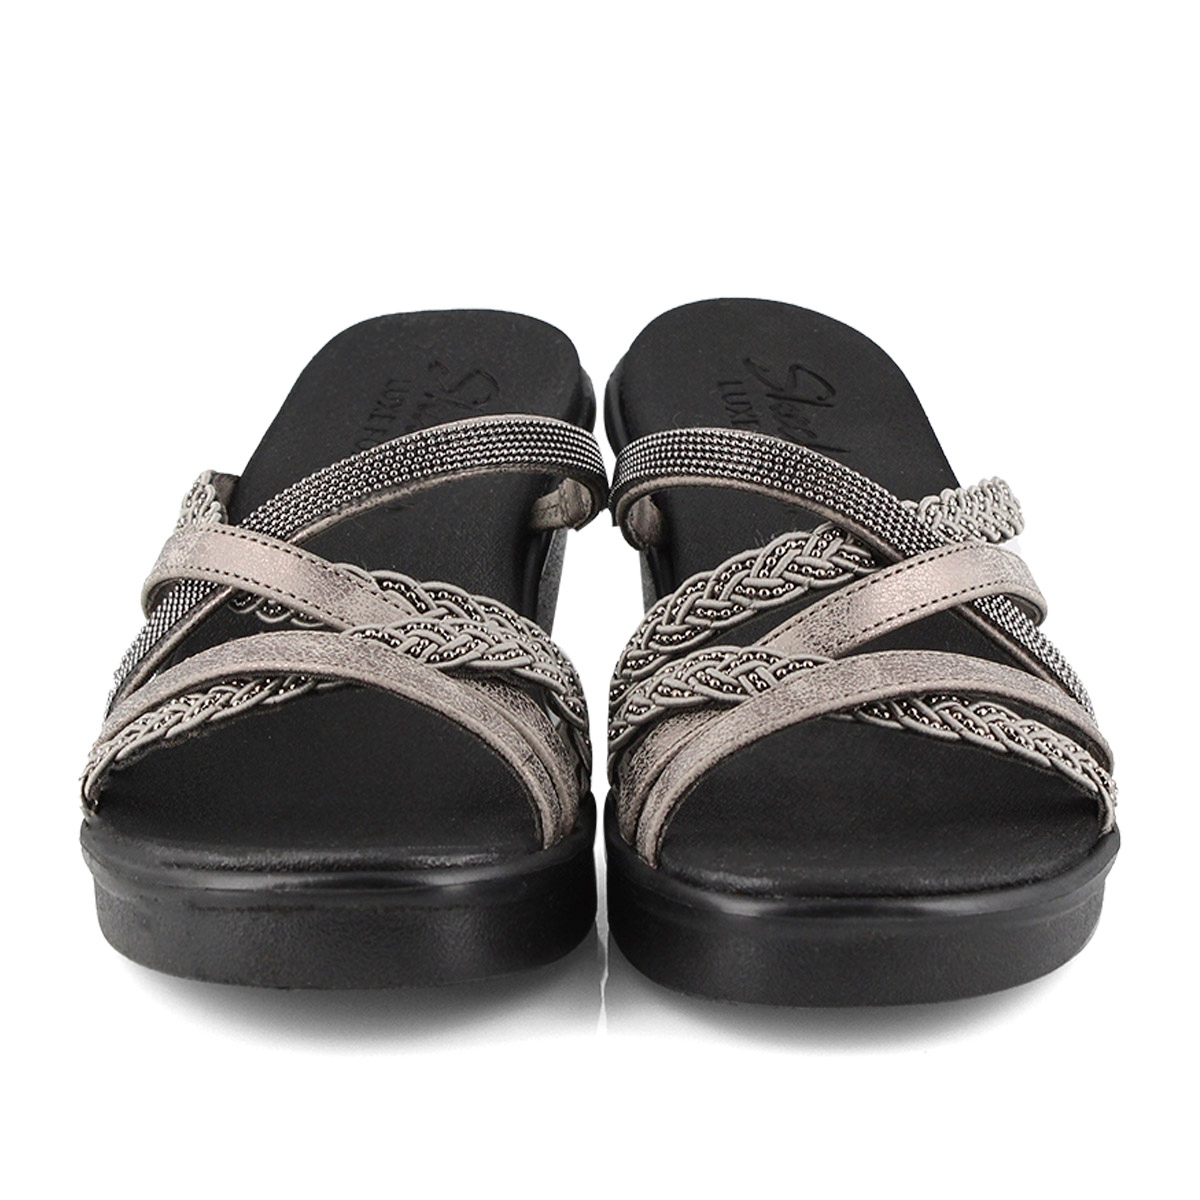 Women's Rumble On Dreamy Days Sandal - Pewter